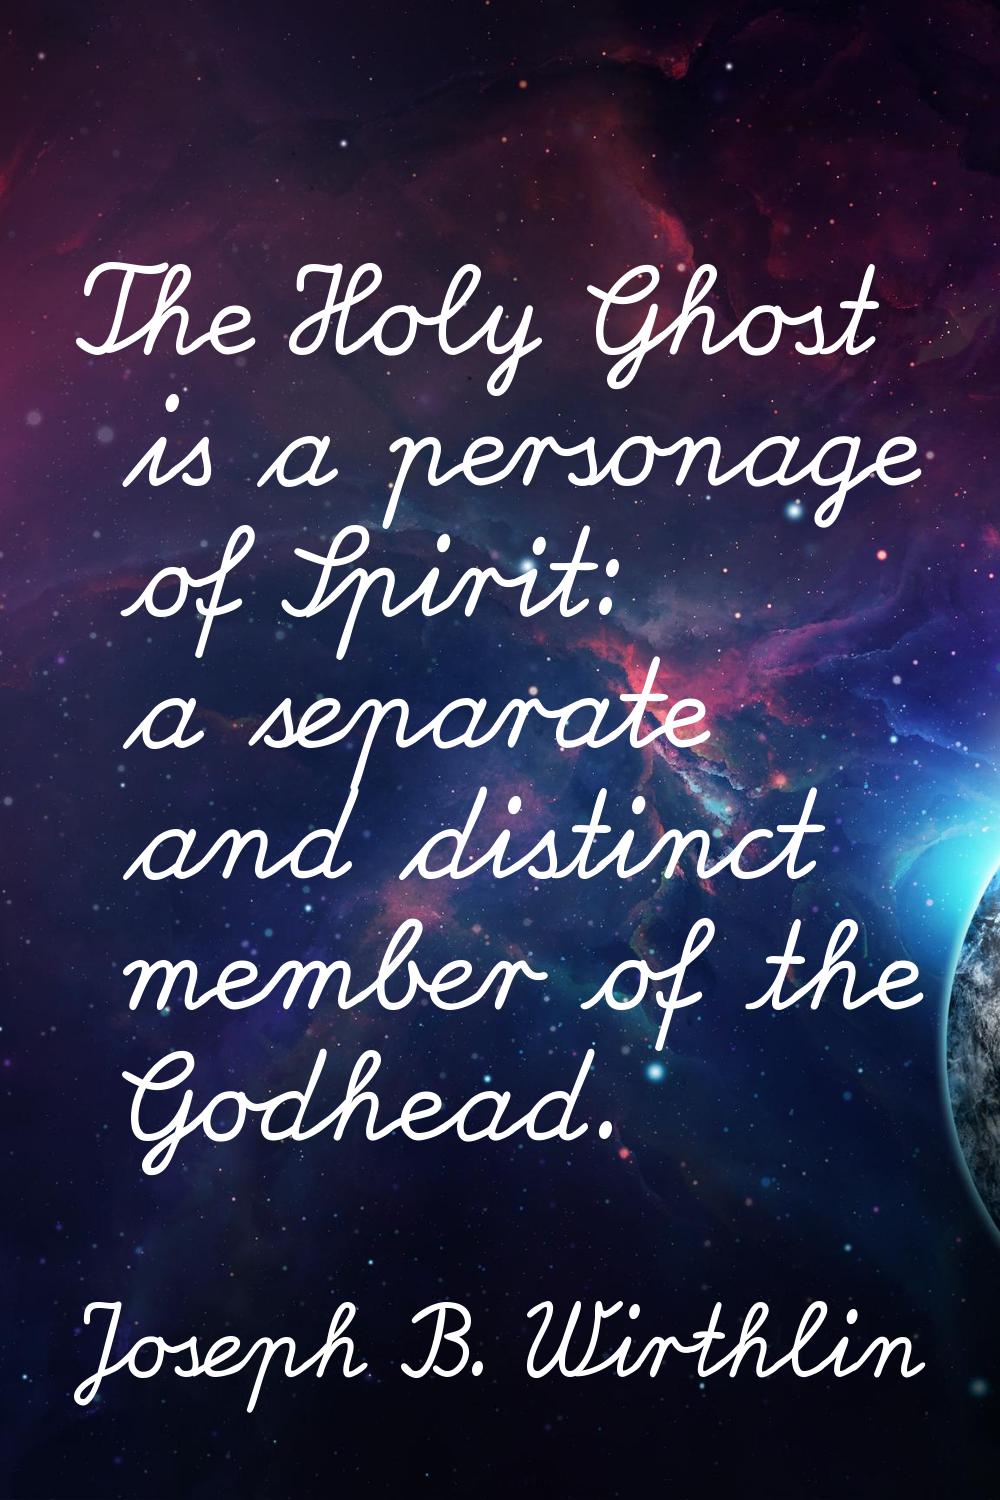 The Holy Ghost is a personage of Spirit: a separate and distinct member of the Godhead.